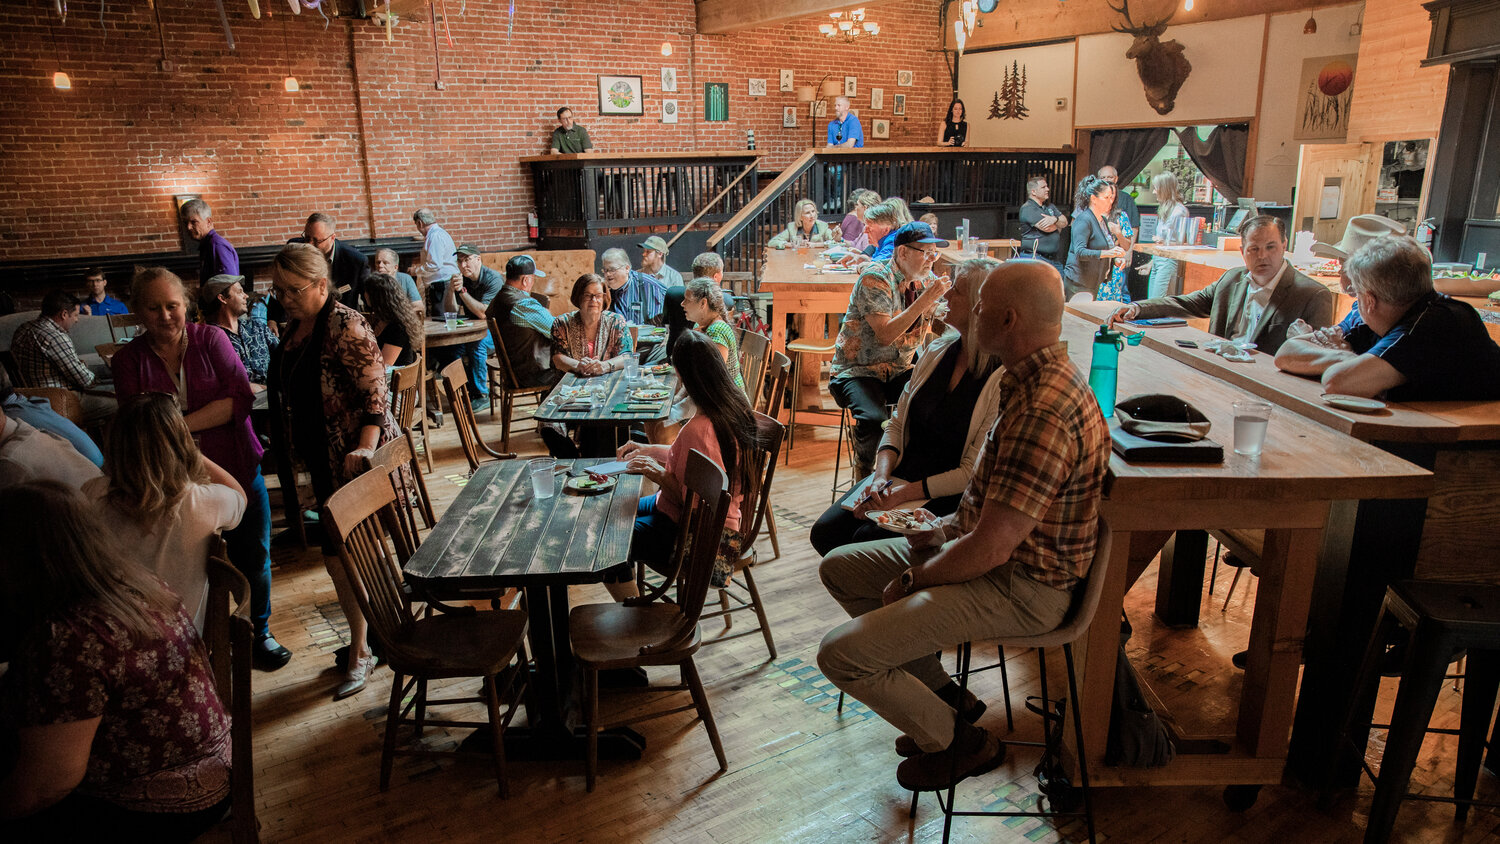 Attendees gather to learn about the economic forecast for Lewis County during an event hosted by the Economic Alliance of Lewis County at The Juice Box in Centralia on Wednesday, May 17.